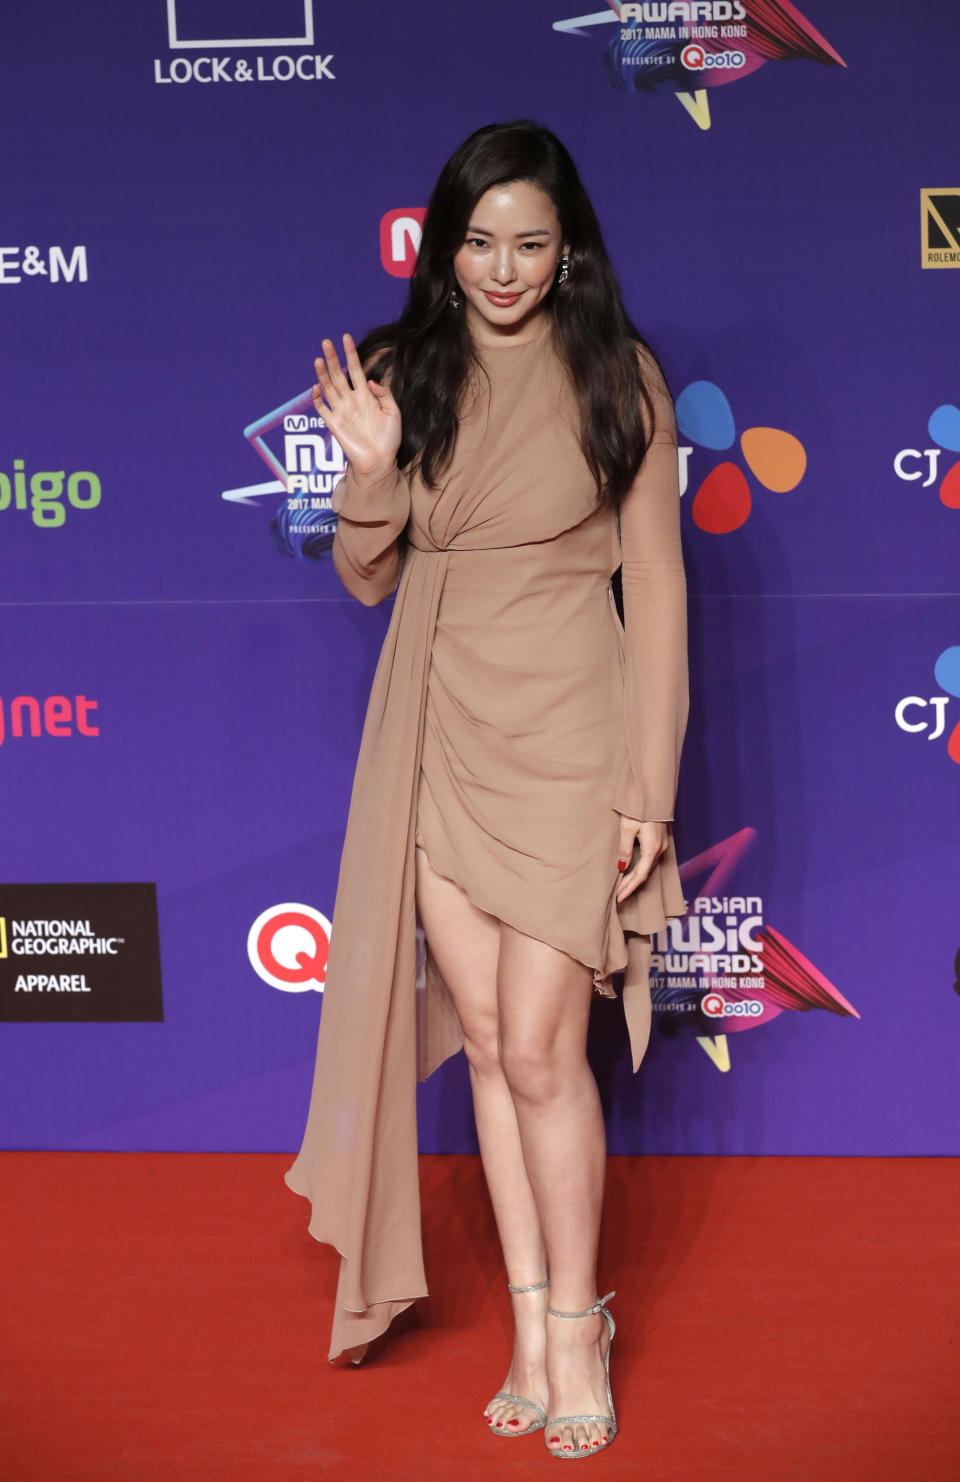 South Korean artist Lee Ha-nui poses for photos on the red carpet of the Mnet Asian Music Awards (MAMA) in Hong Kong, Friday, Dec. 1, 2017. (AP Photo/Kin Cheung)